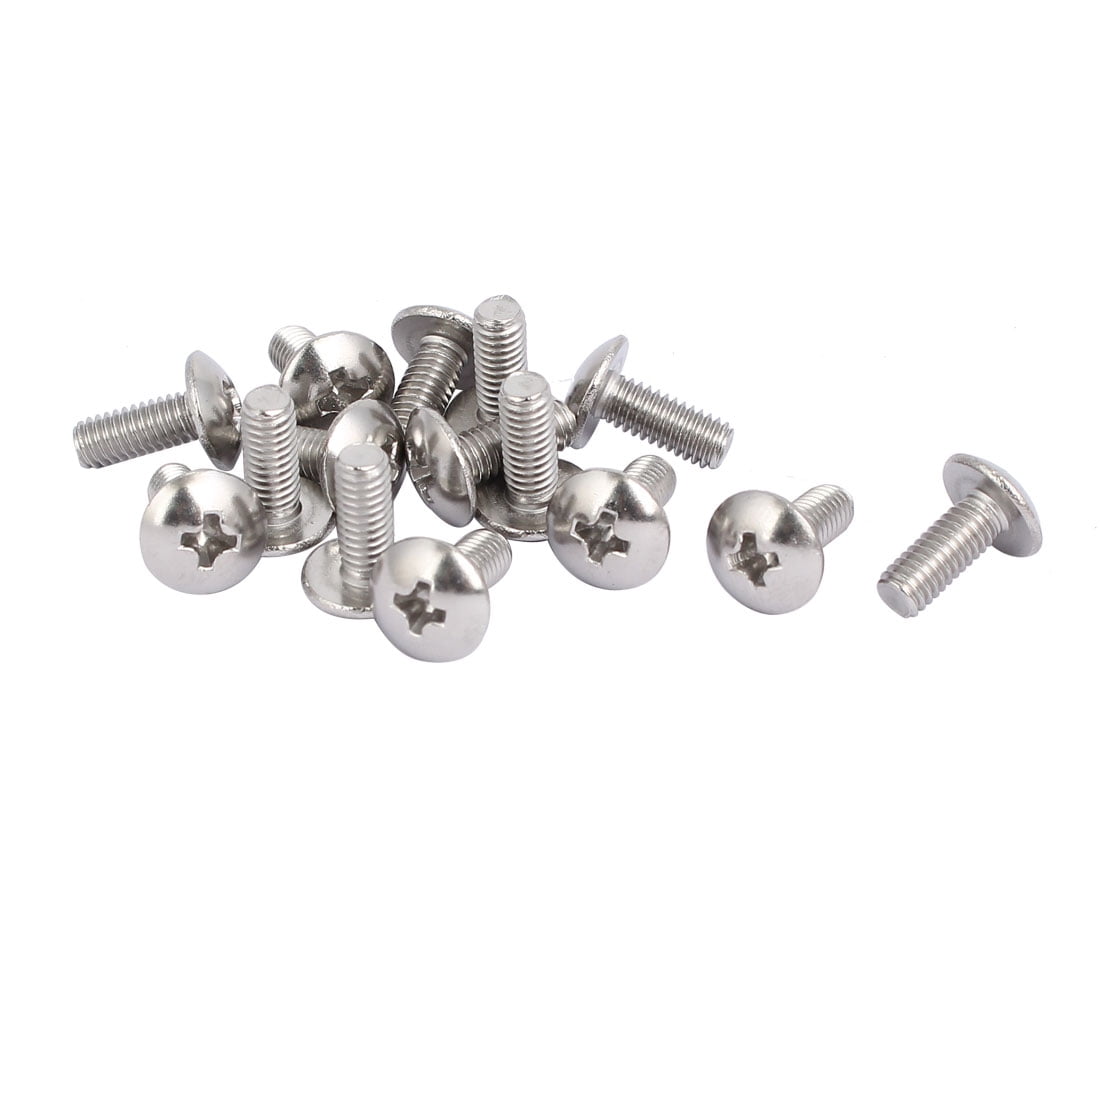 M3/4/5 Flanged Round Dome Head Screws 316 Stainless Phillips Machine Screw Bolts 